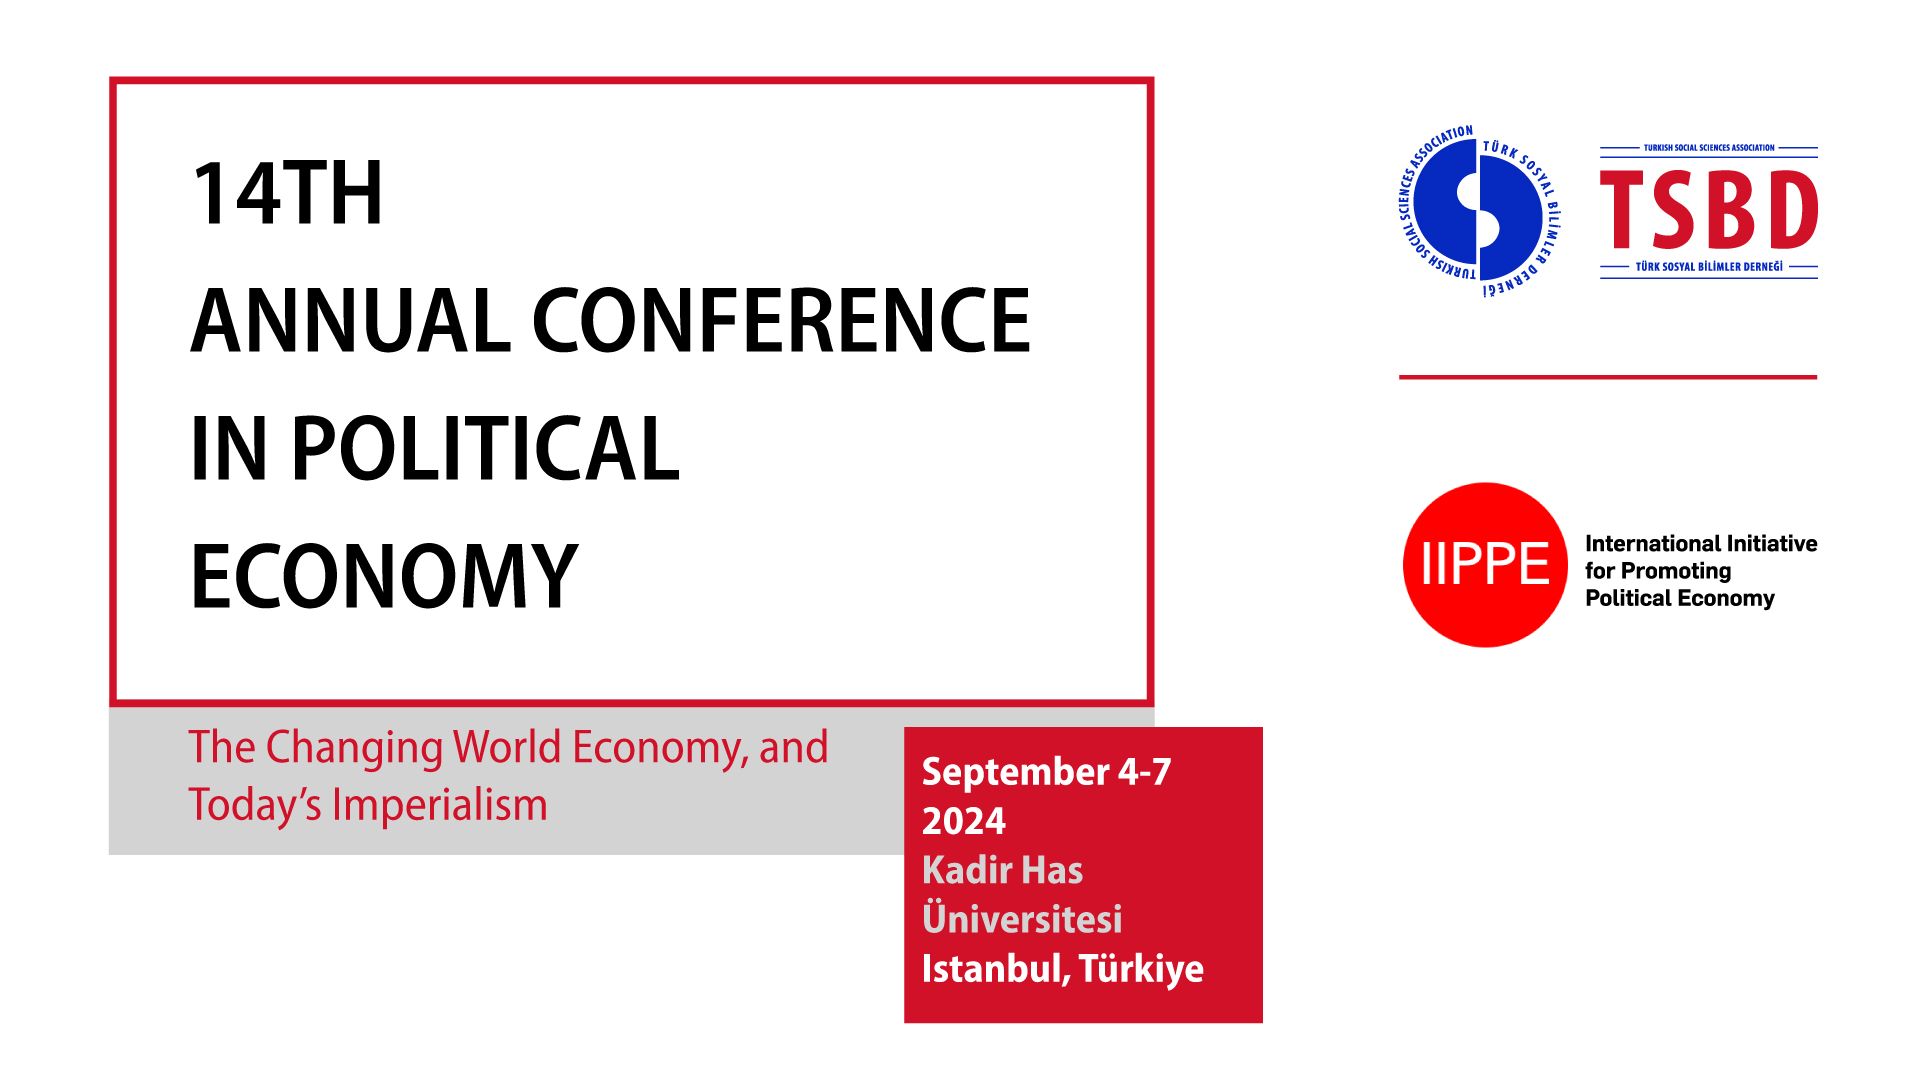 14TH ANNUAL CONFERENCE IN POLITICAL ECONOMY